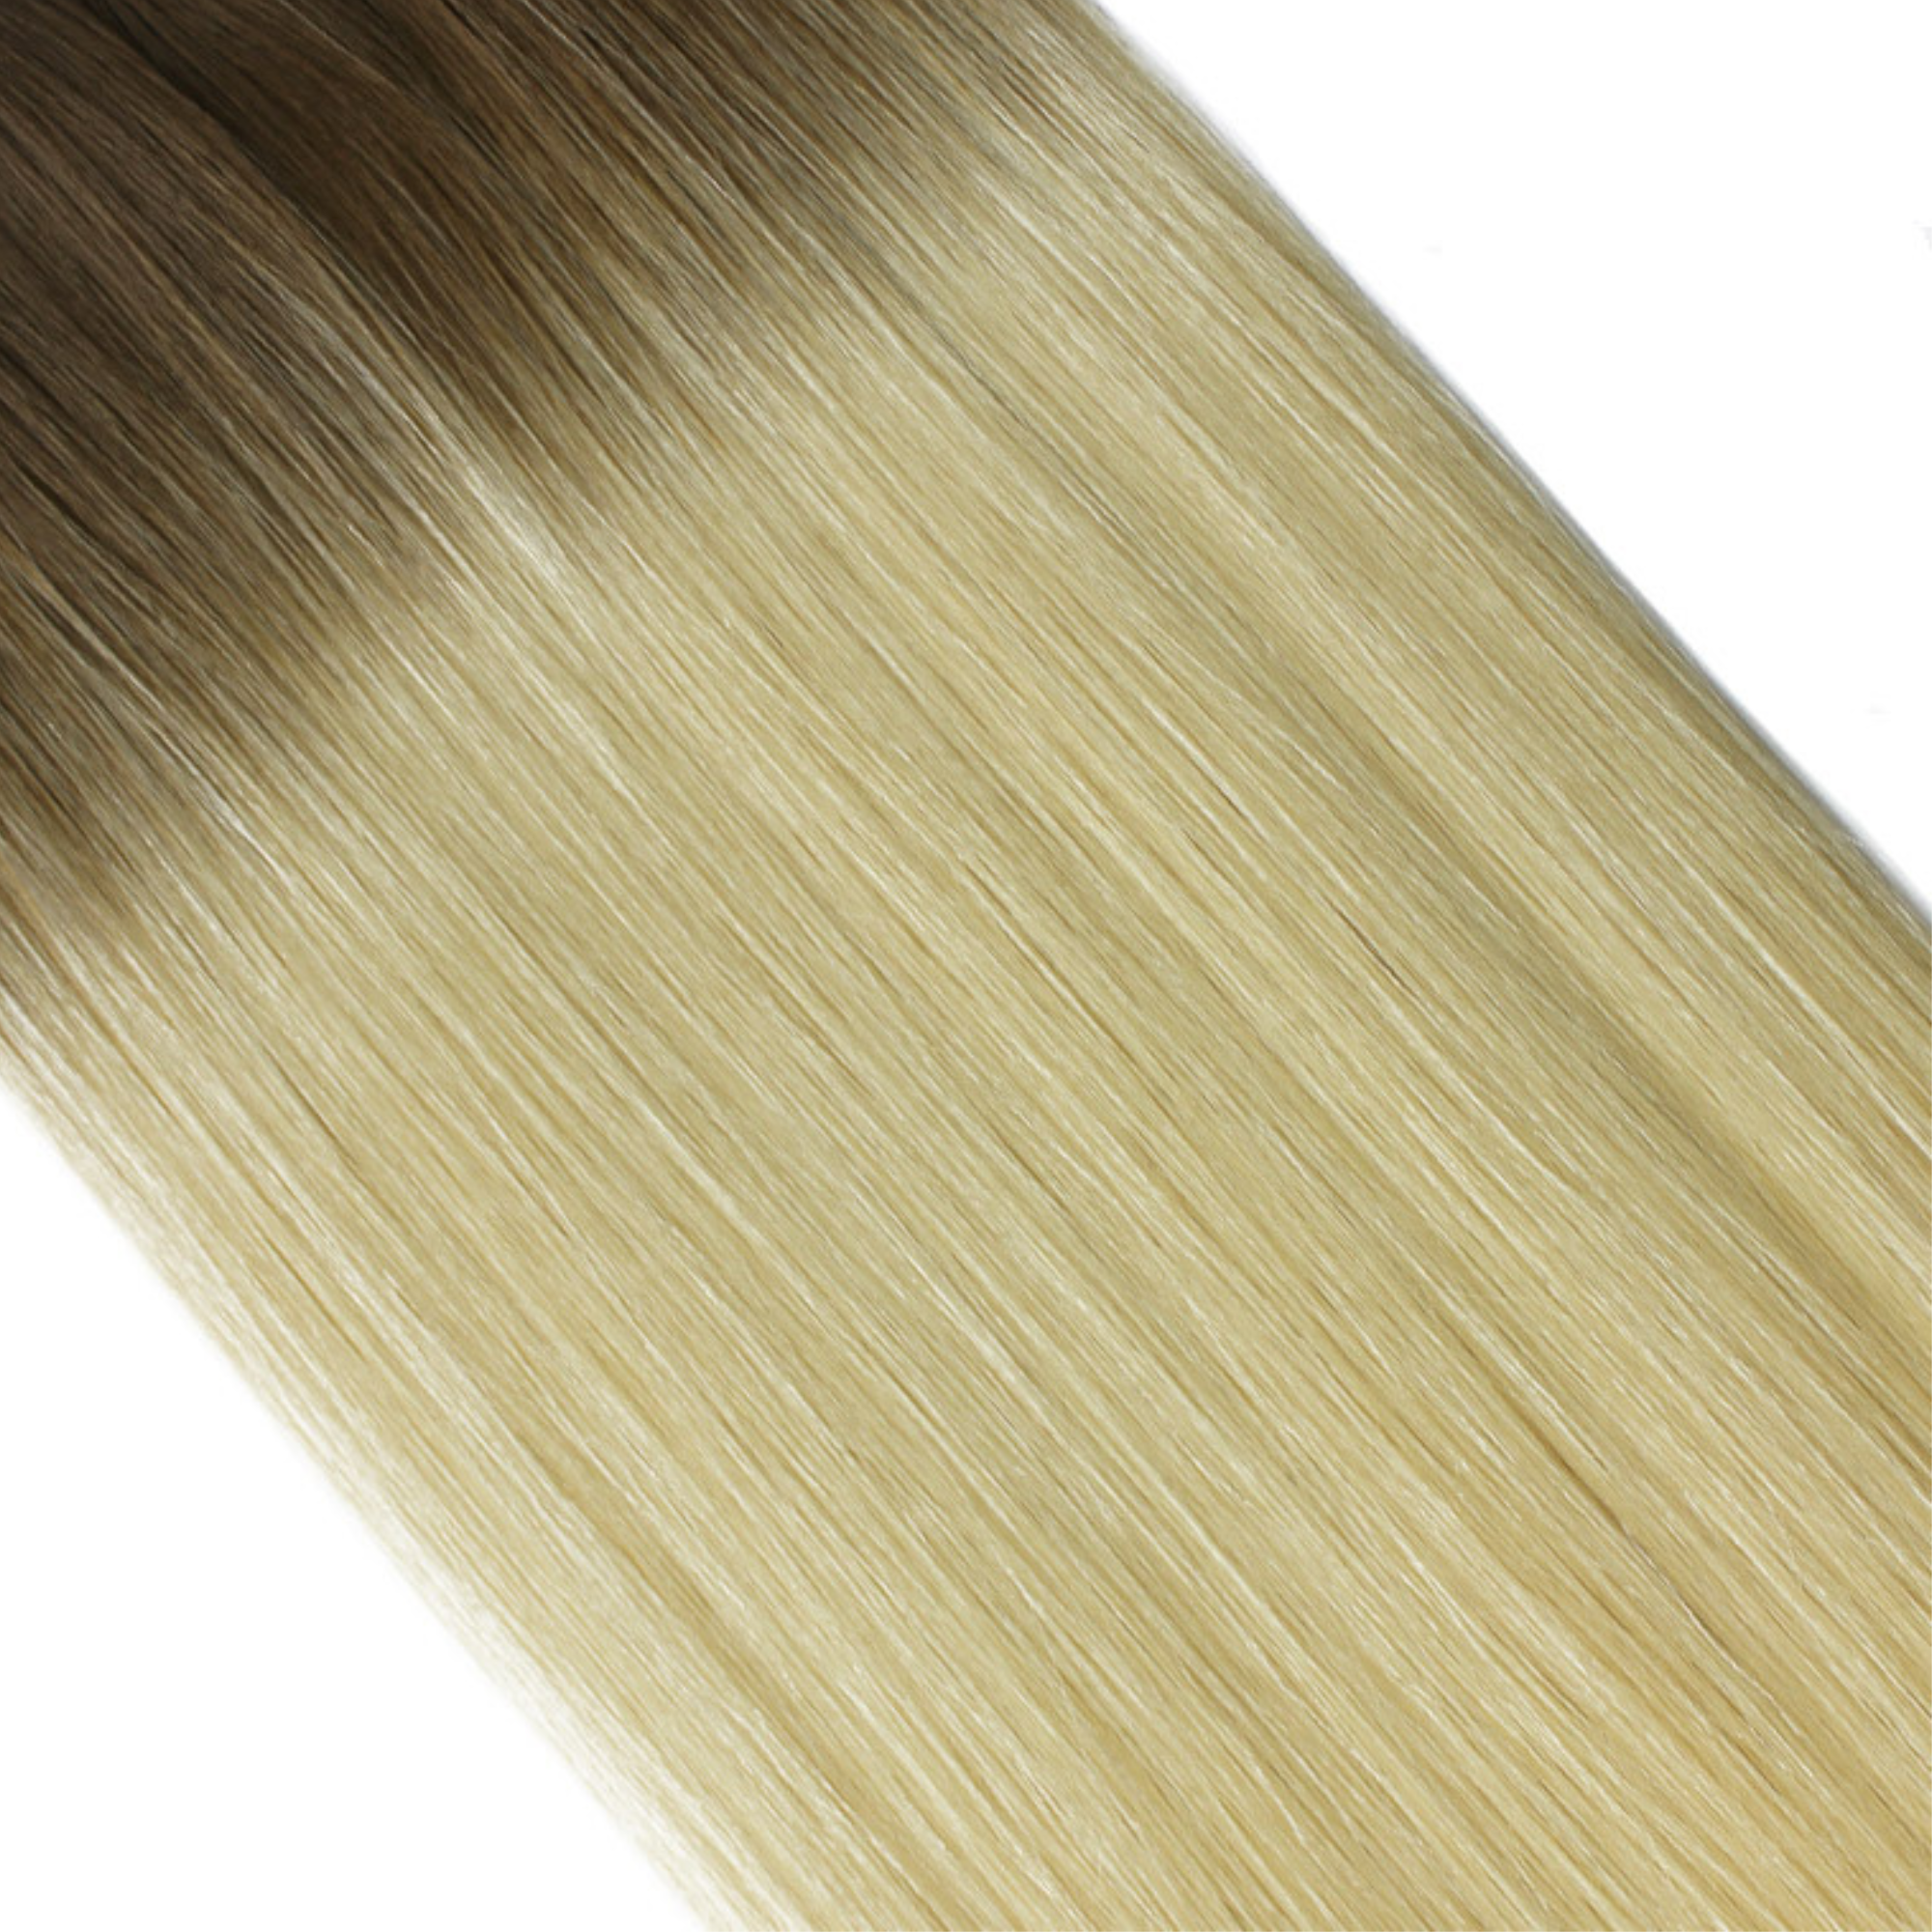 "hair rehab london 18" tape hair extensions shade swatch titled rooted bali blonde"